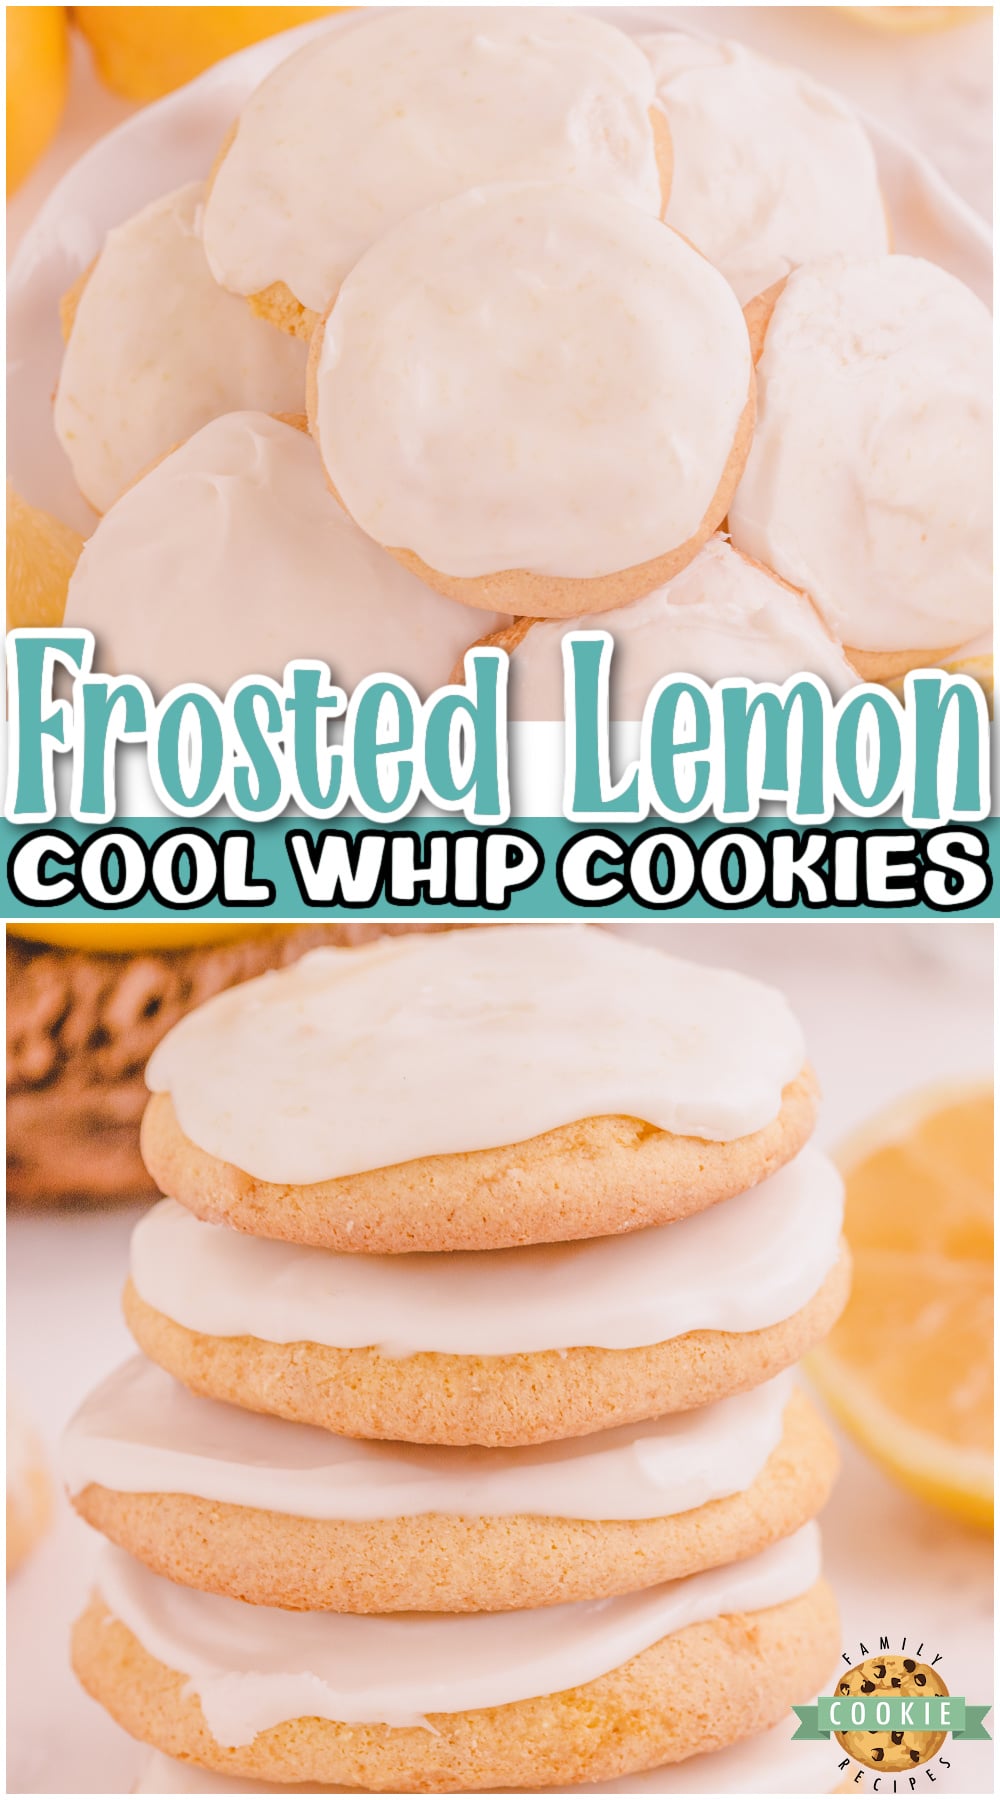 Lemon Cake Mix Cool Whip Cookies are a fun & tasty 3 ingredient soft lemony cookie recipe that everyone loves! Cake mix, Cool Whip and an egg combine for a super simple lemon cookie that tastes delicious. 